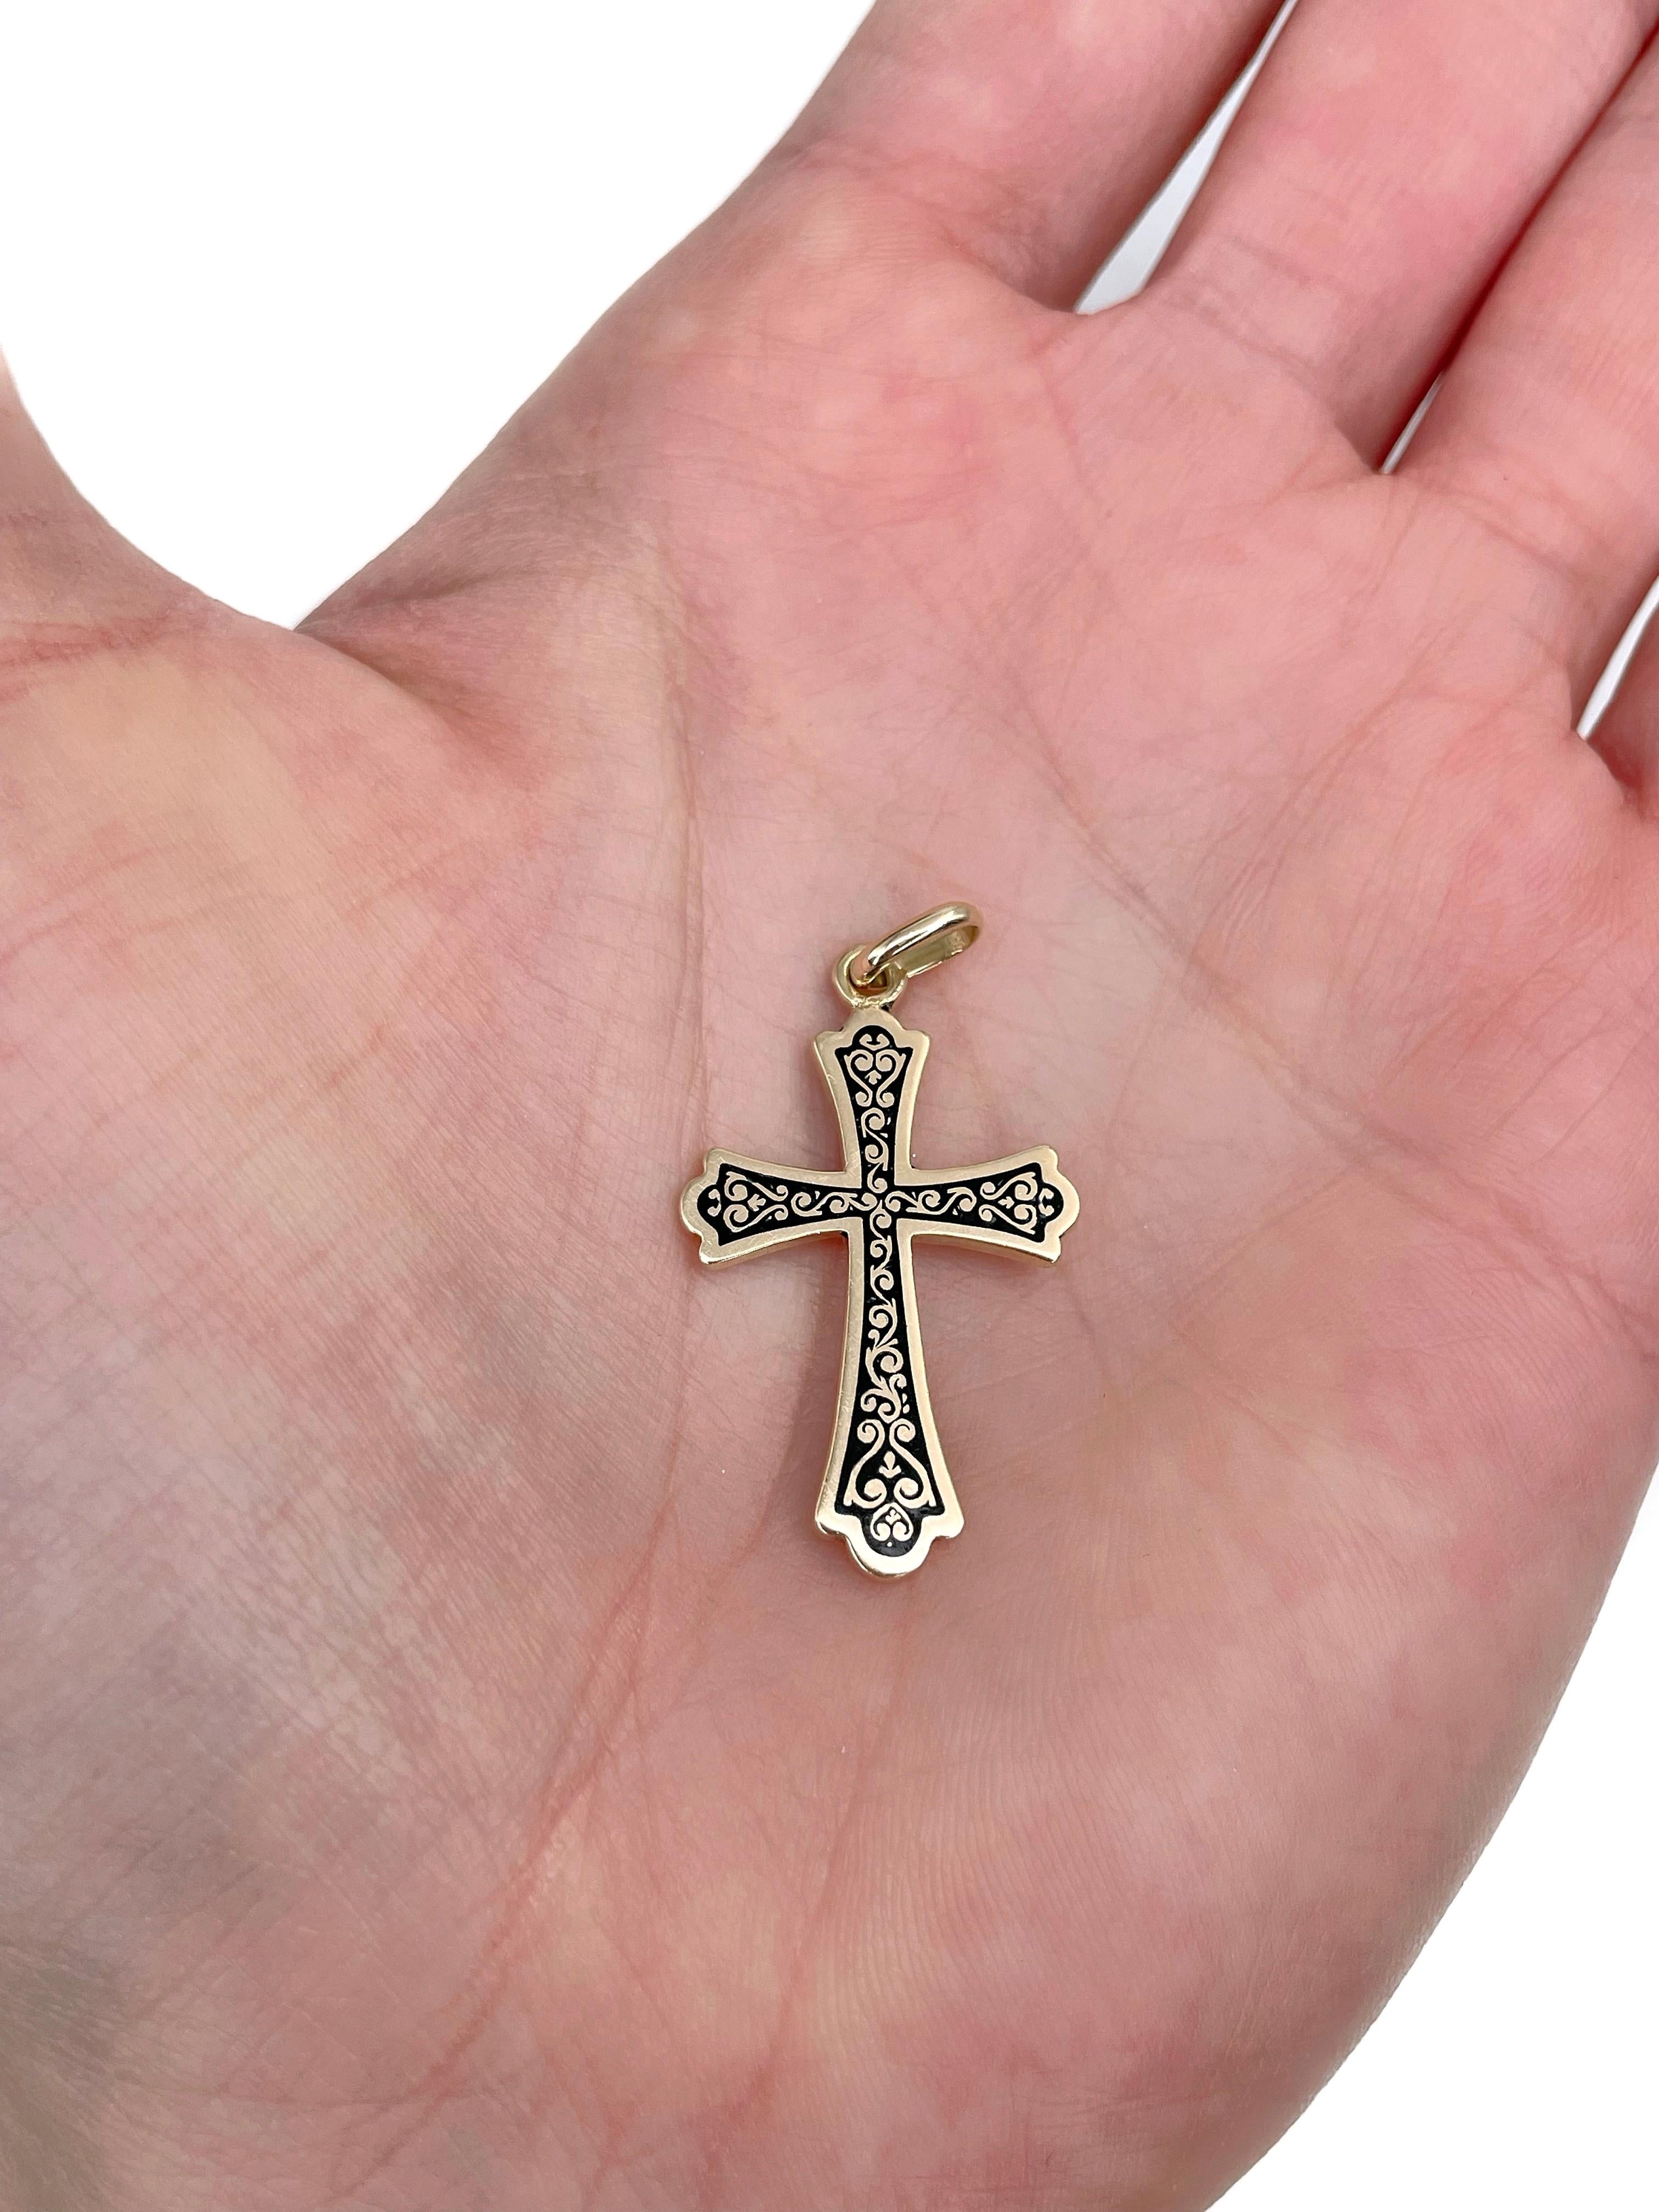 This is a small Victorian cross pendant crafted in 14K gold. Circa 1900. It features nice ornaments made of black enamel filled with gold. 
 
Circa 1900

Weight: 1.74g
Size: 3.5x1.8cm

———

If you have any questions, please feel free to ask. We